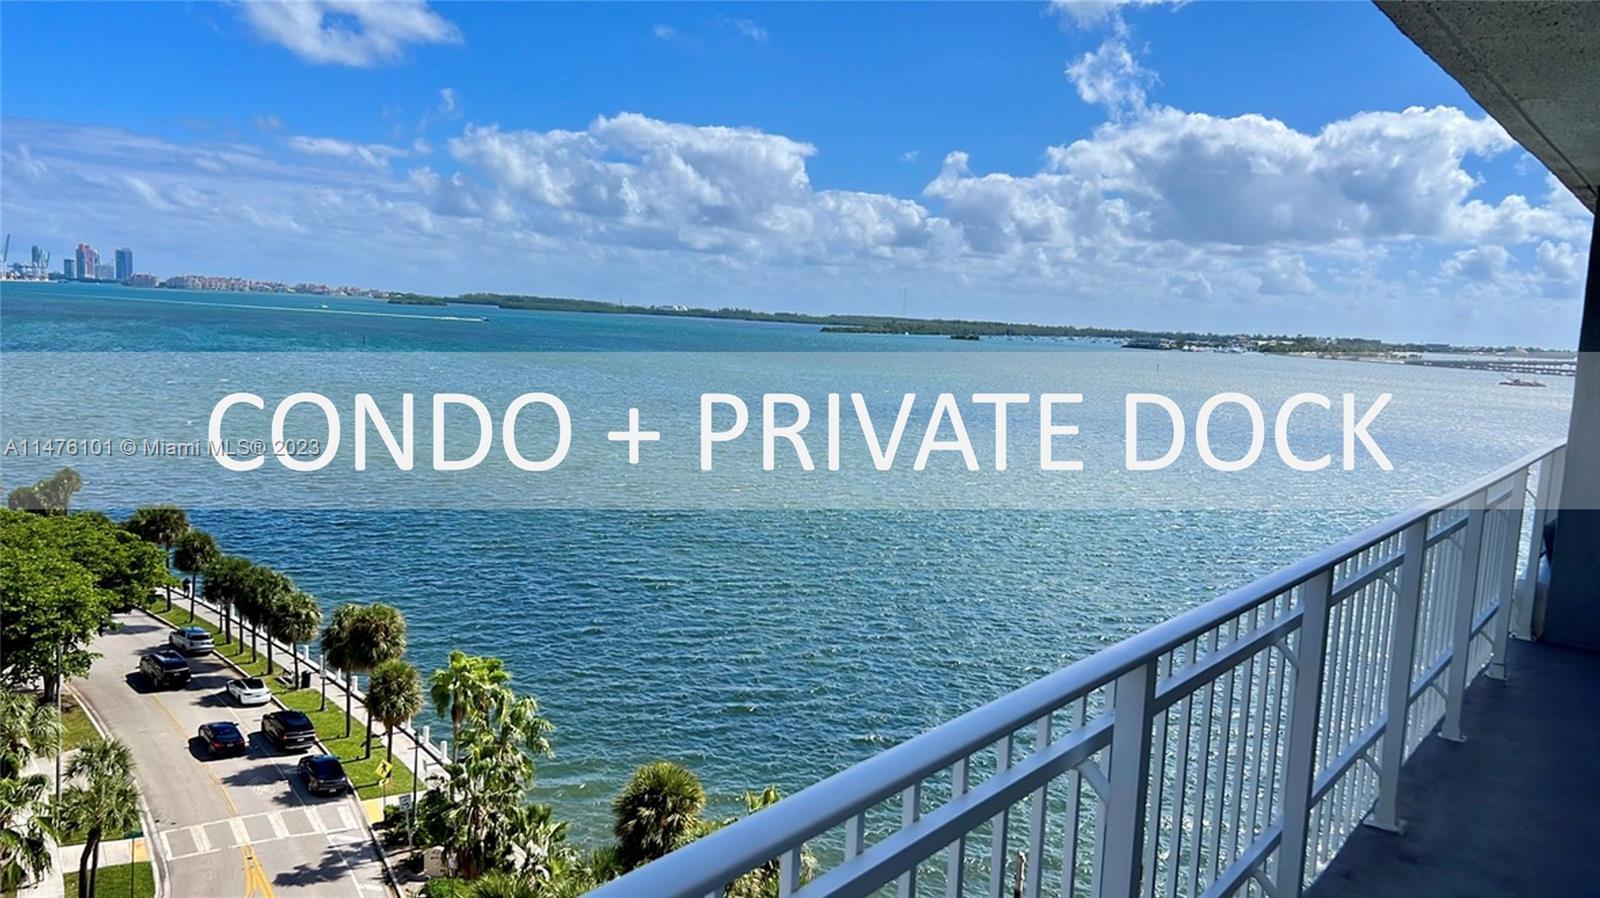 Beautiful Biscayne Bay views!
This 3 bedroom, 2 and a half bathrooms unit comes with two covered as